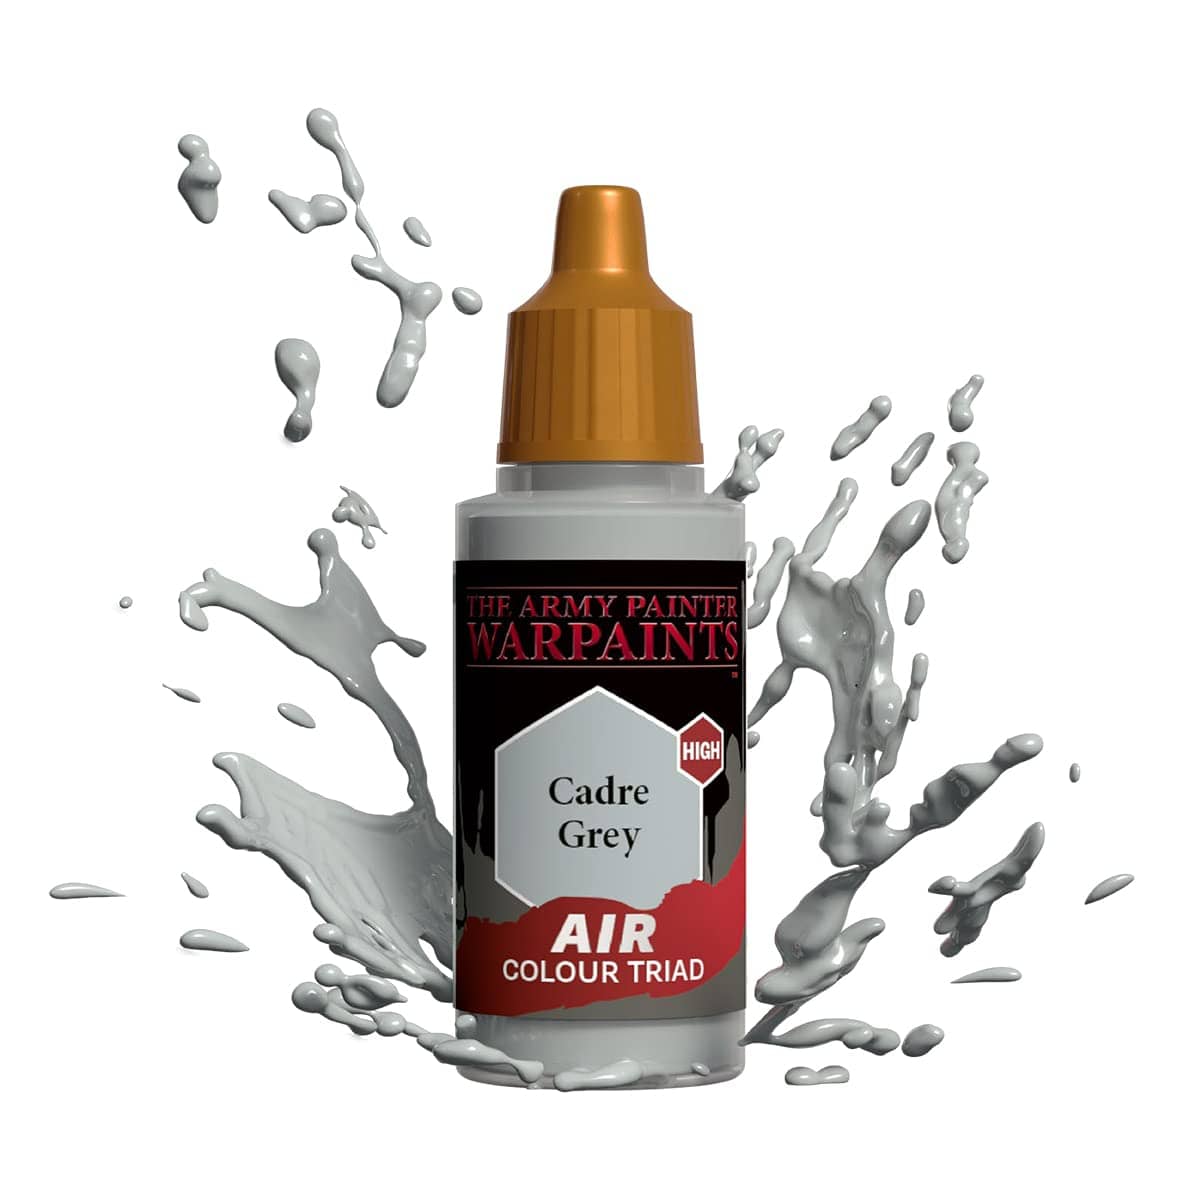 The Army Painter Accessories The Army Painter Warpaints Air: Cadre Grey 18ml